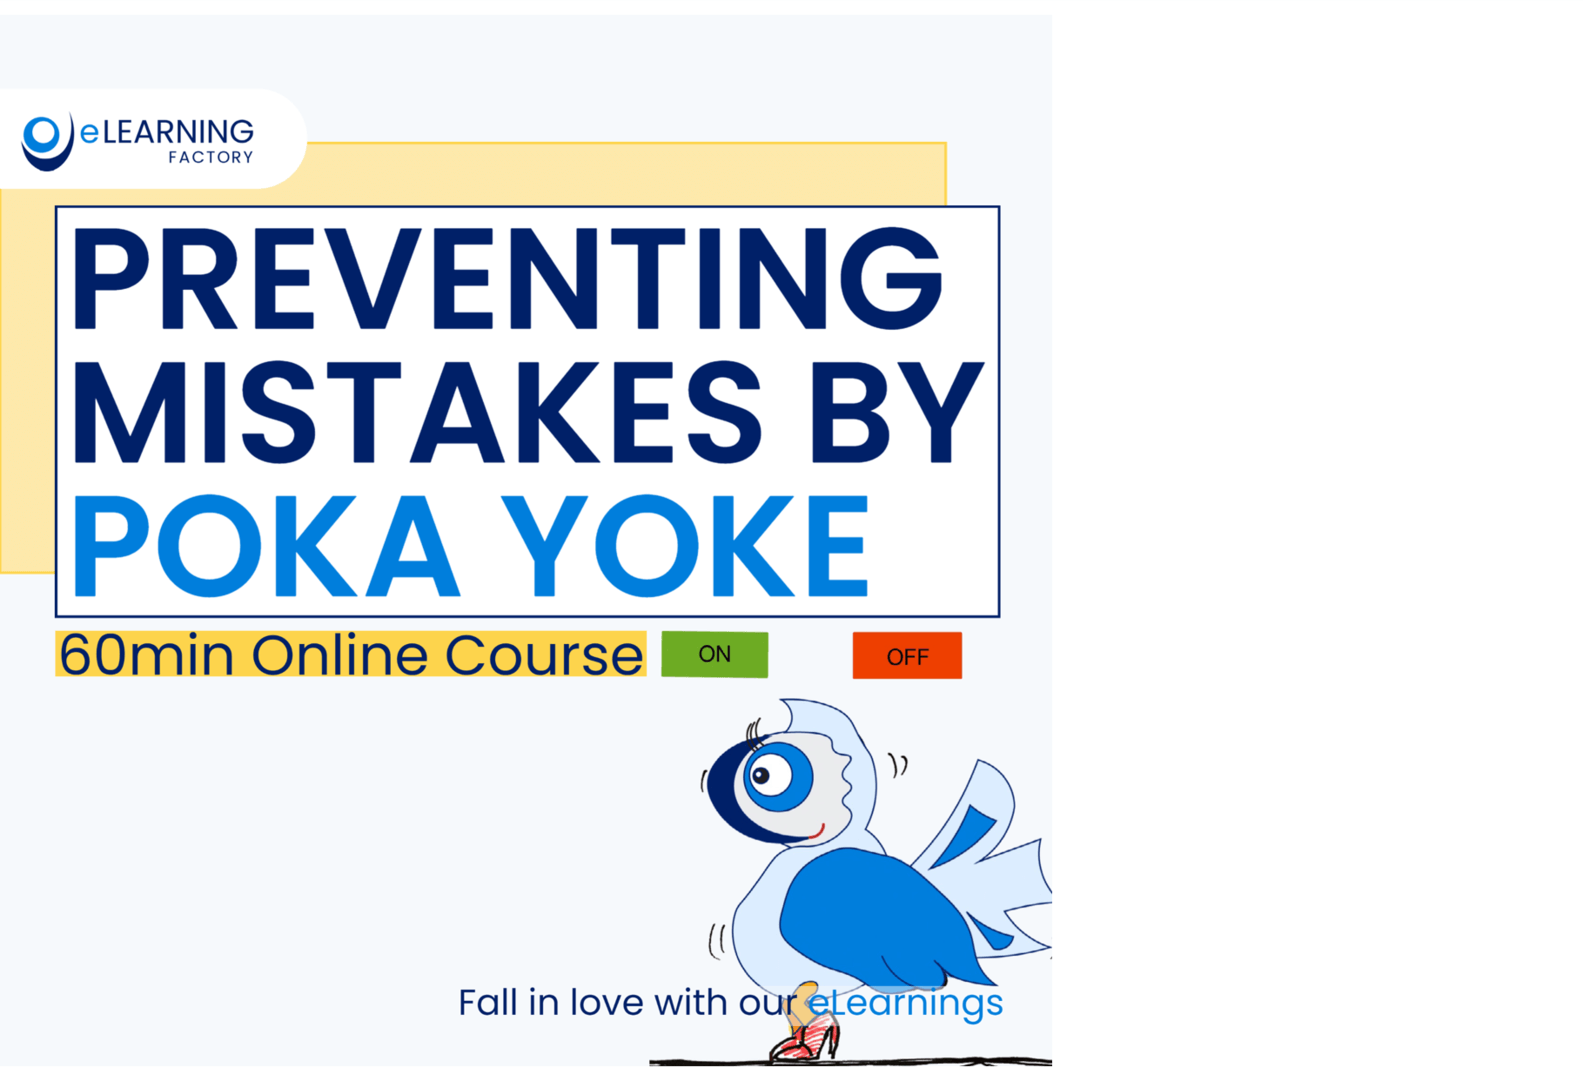 Avoid Human Error. Work with Poka Yoke. This is based on principles you will learn to apply. 